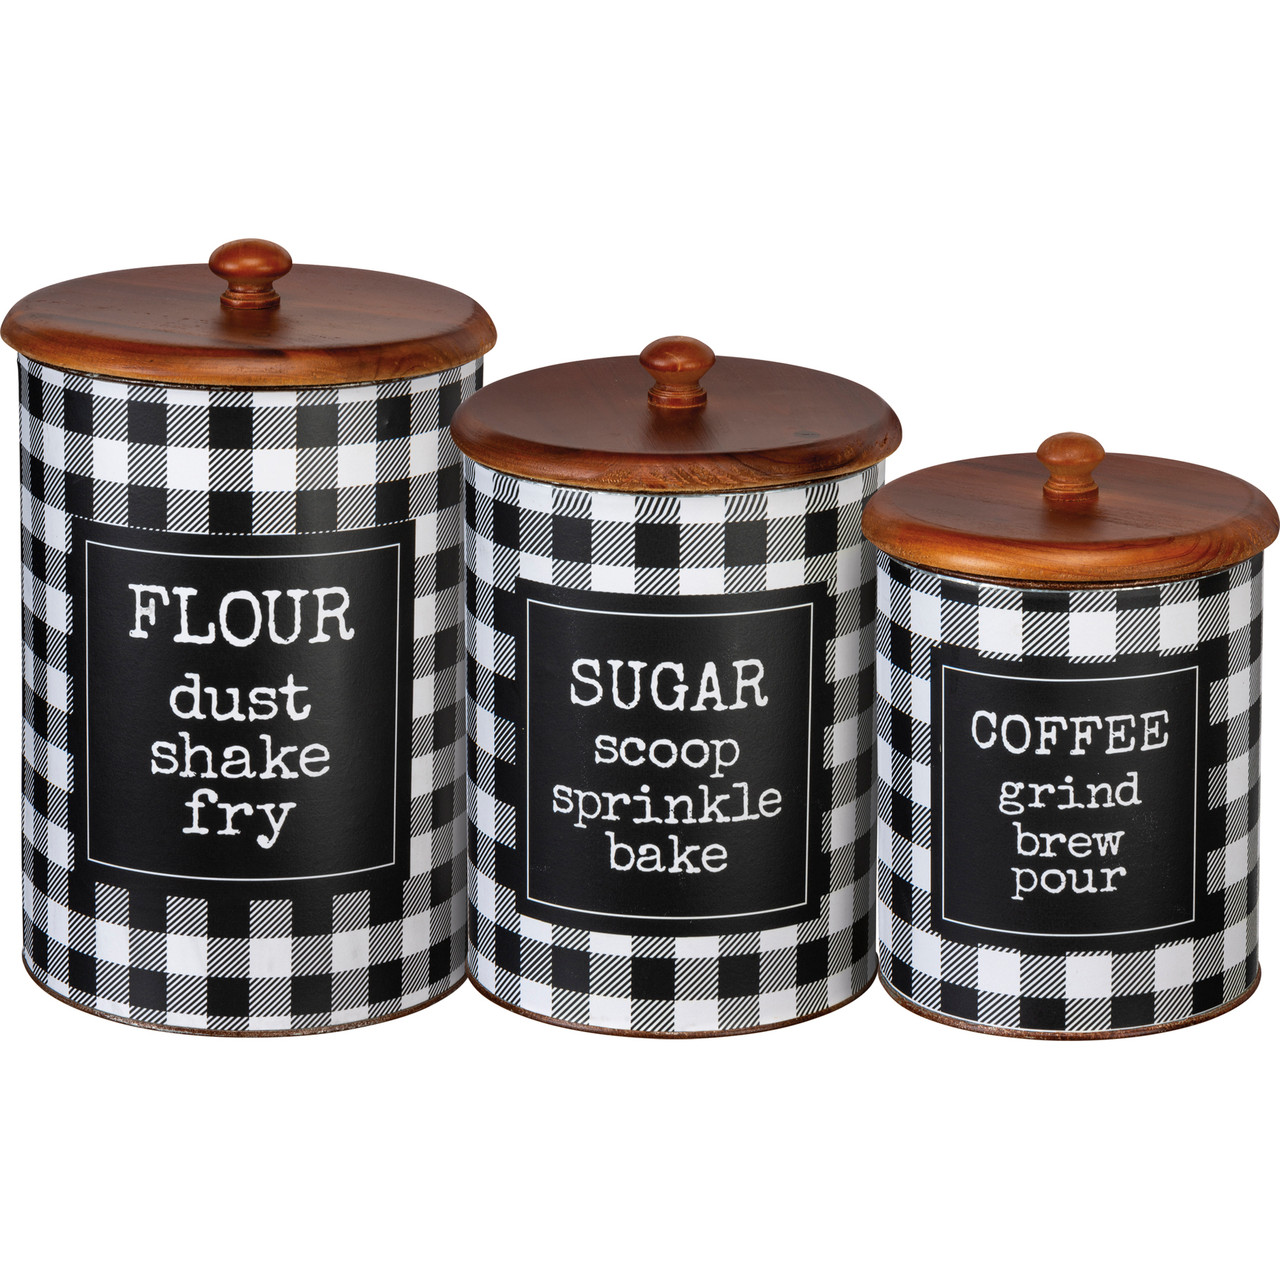 Distressed Metal Flour & Sugar Canister Set Rustic Kitchen